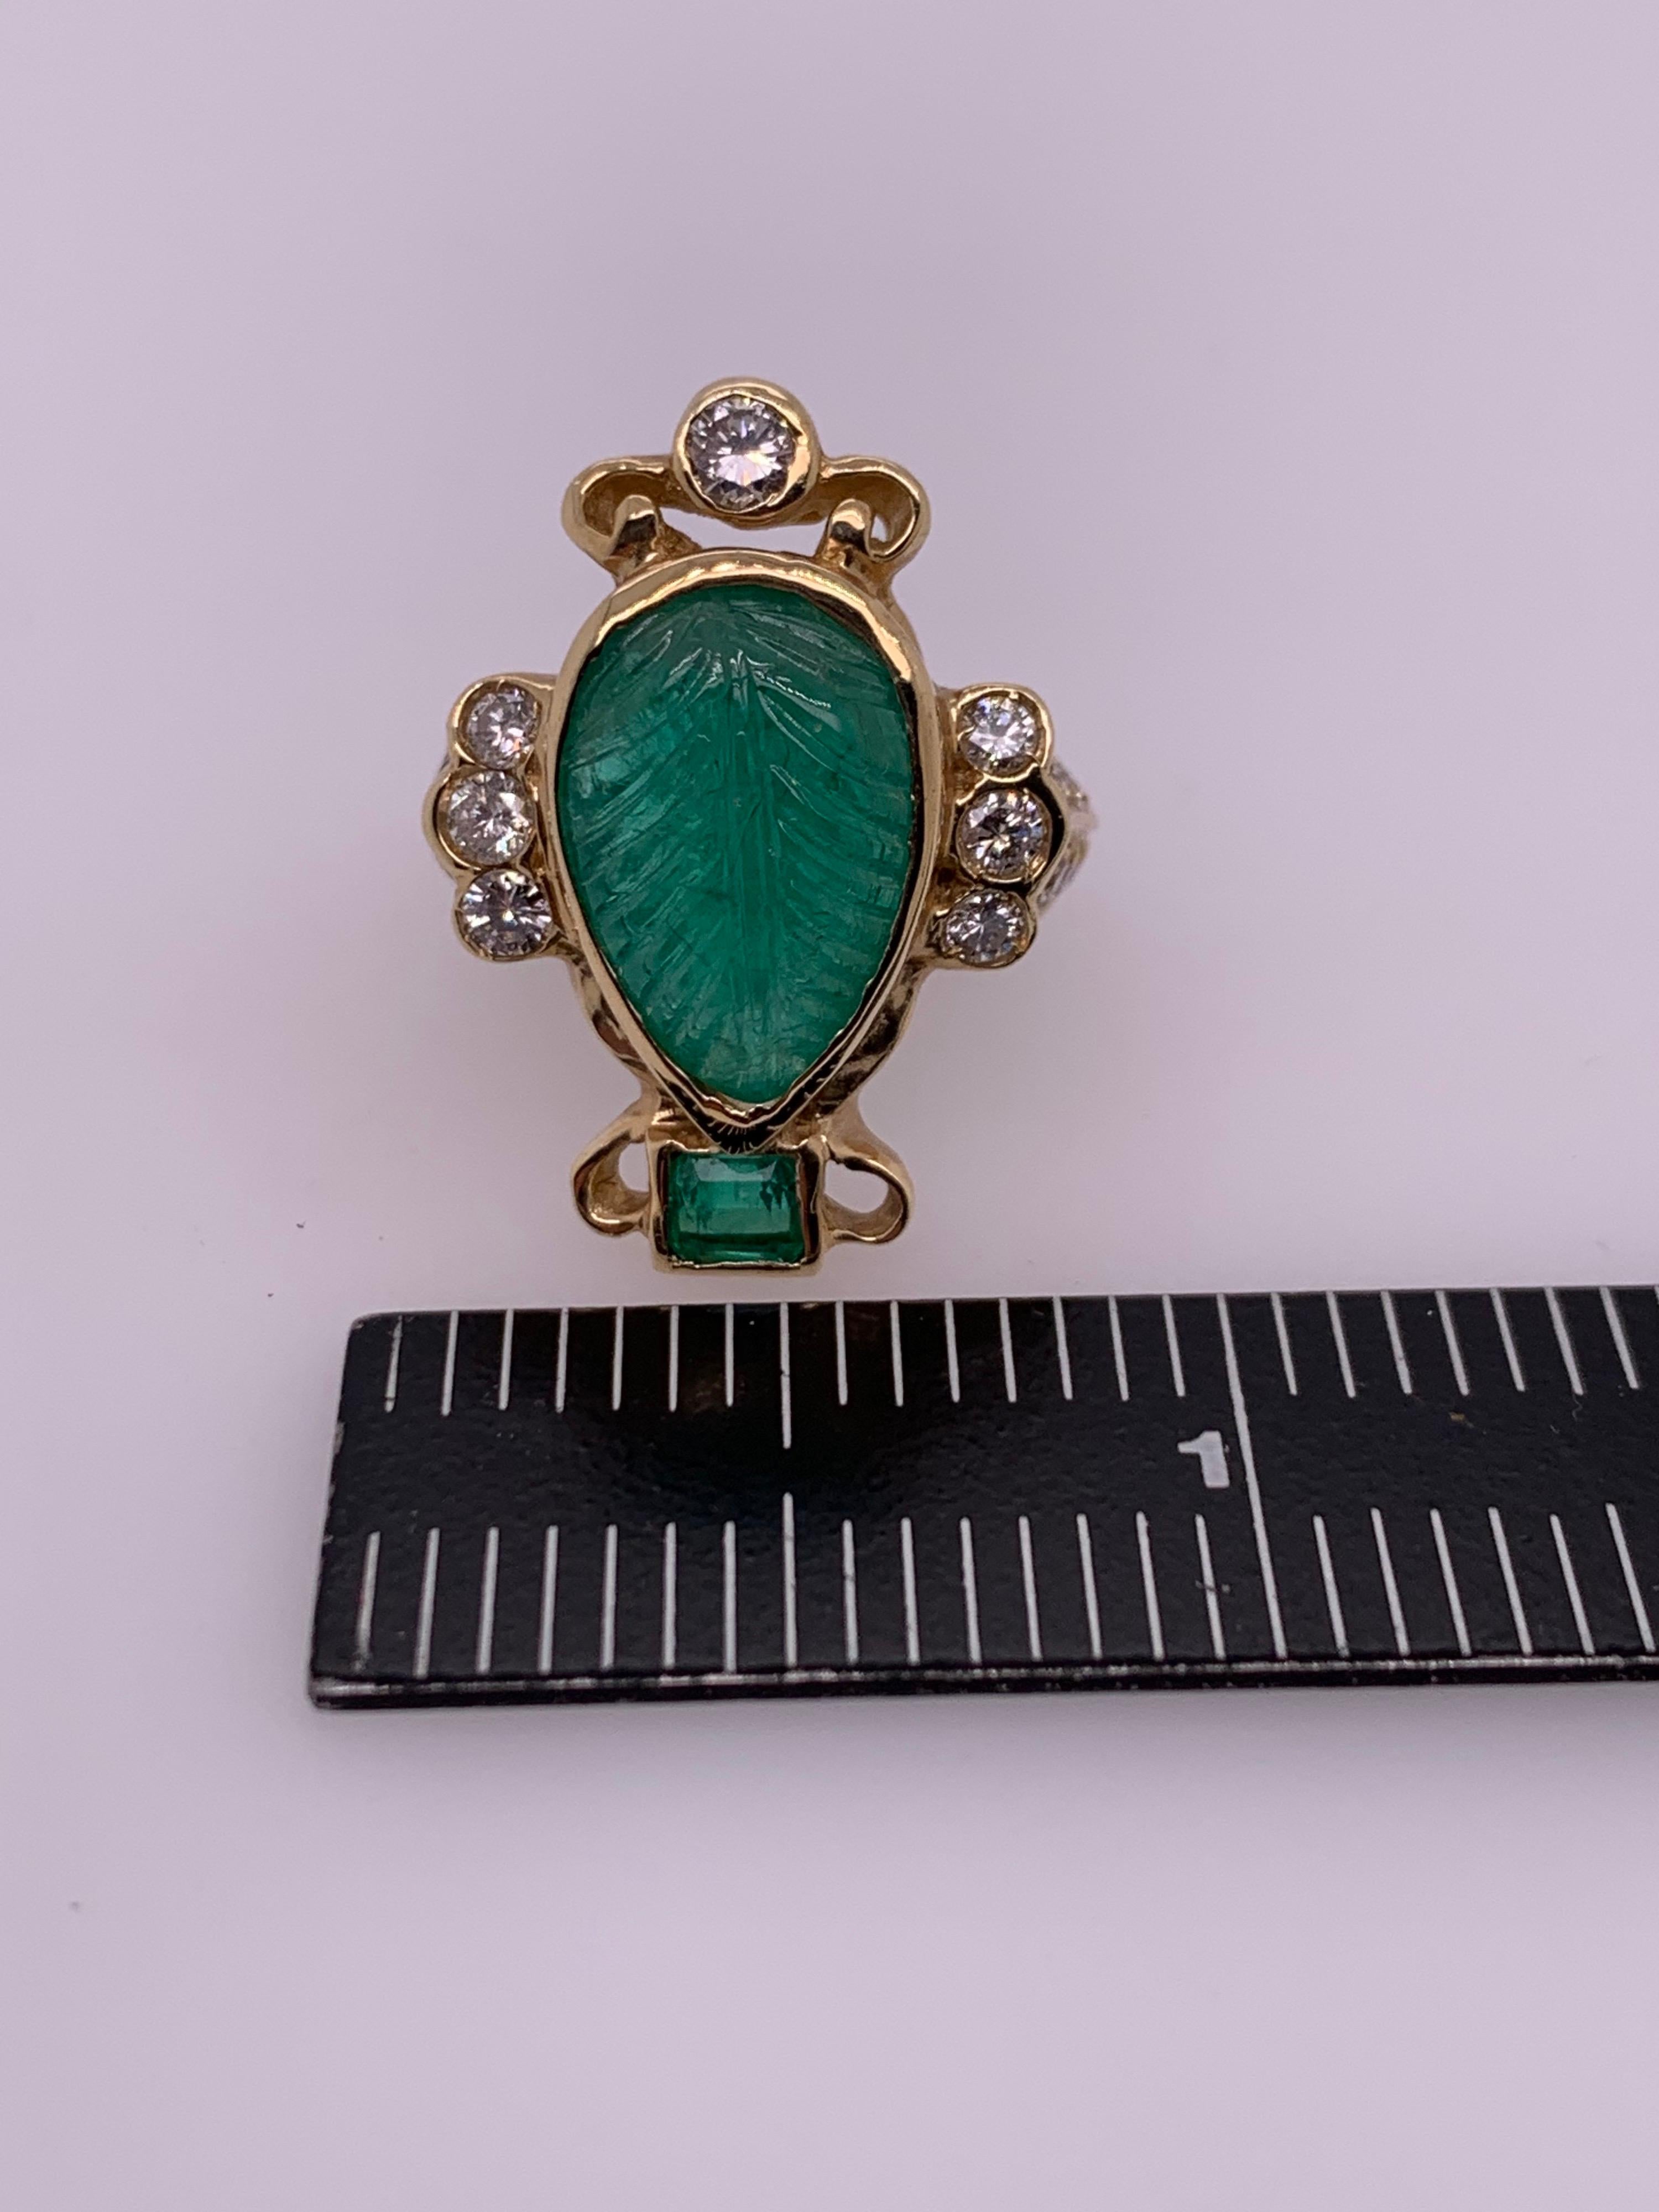 Retro Gold Ring 6 Carat Natural Carved Emerald, Diamond Cocktail Ring circa 1950 For Sale 7